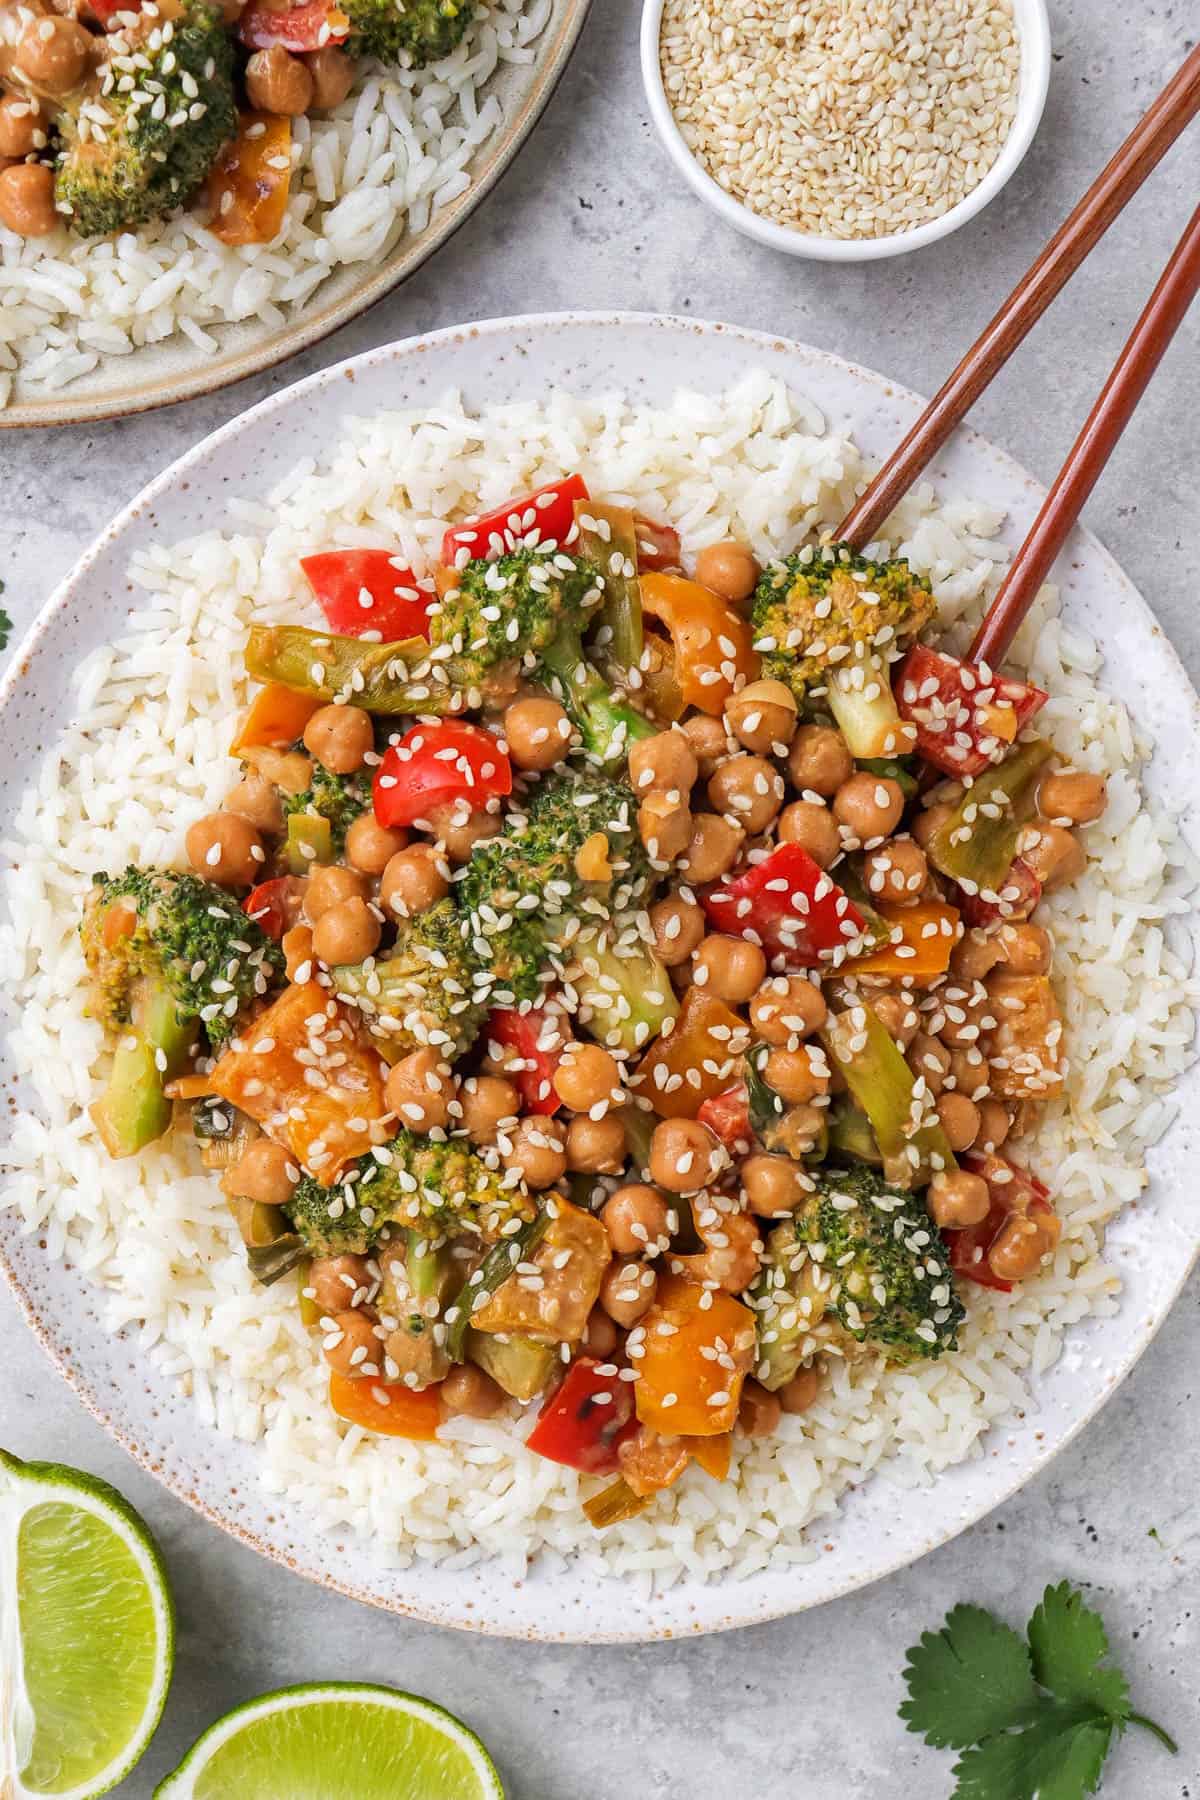 Chickpea vegetable stir fry on a plate with rice and chop sticks. Sesame seeds and cut up limes on the side.